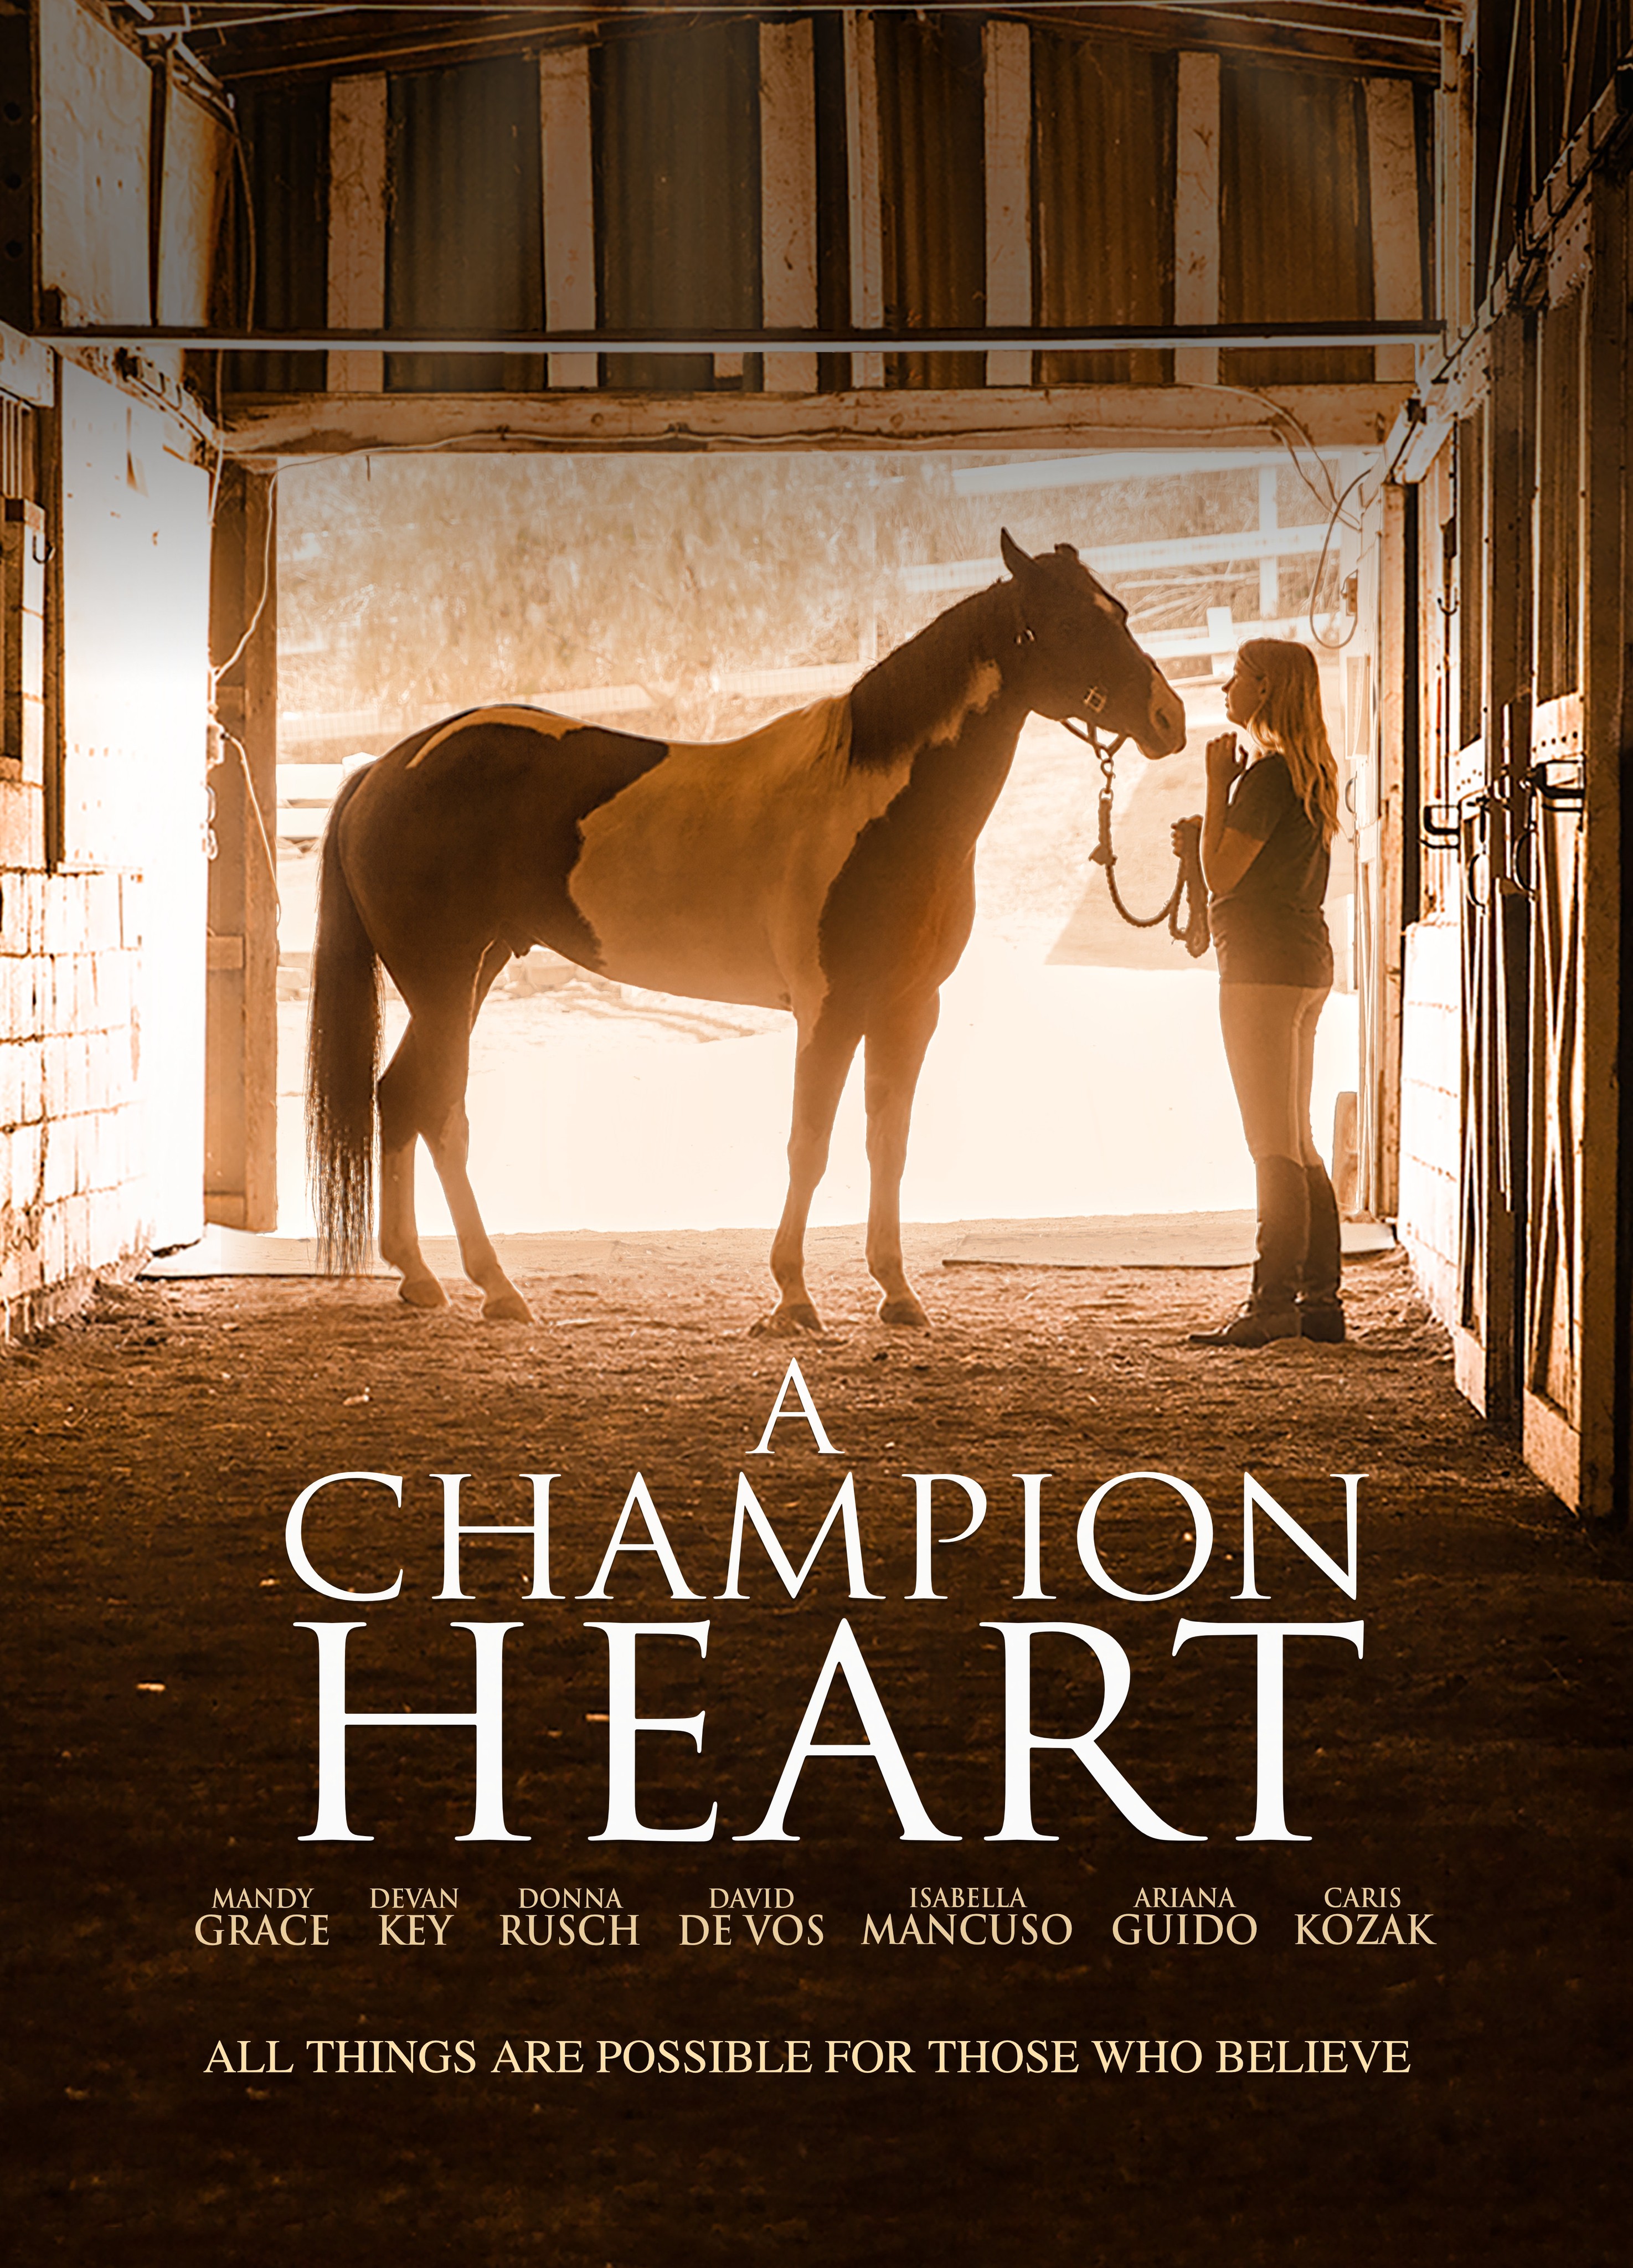 Heart of a Champion - Rotten Tomatoes